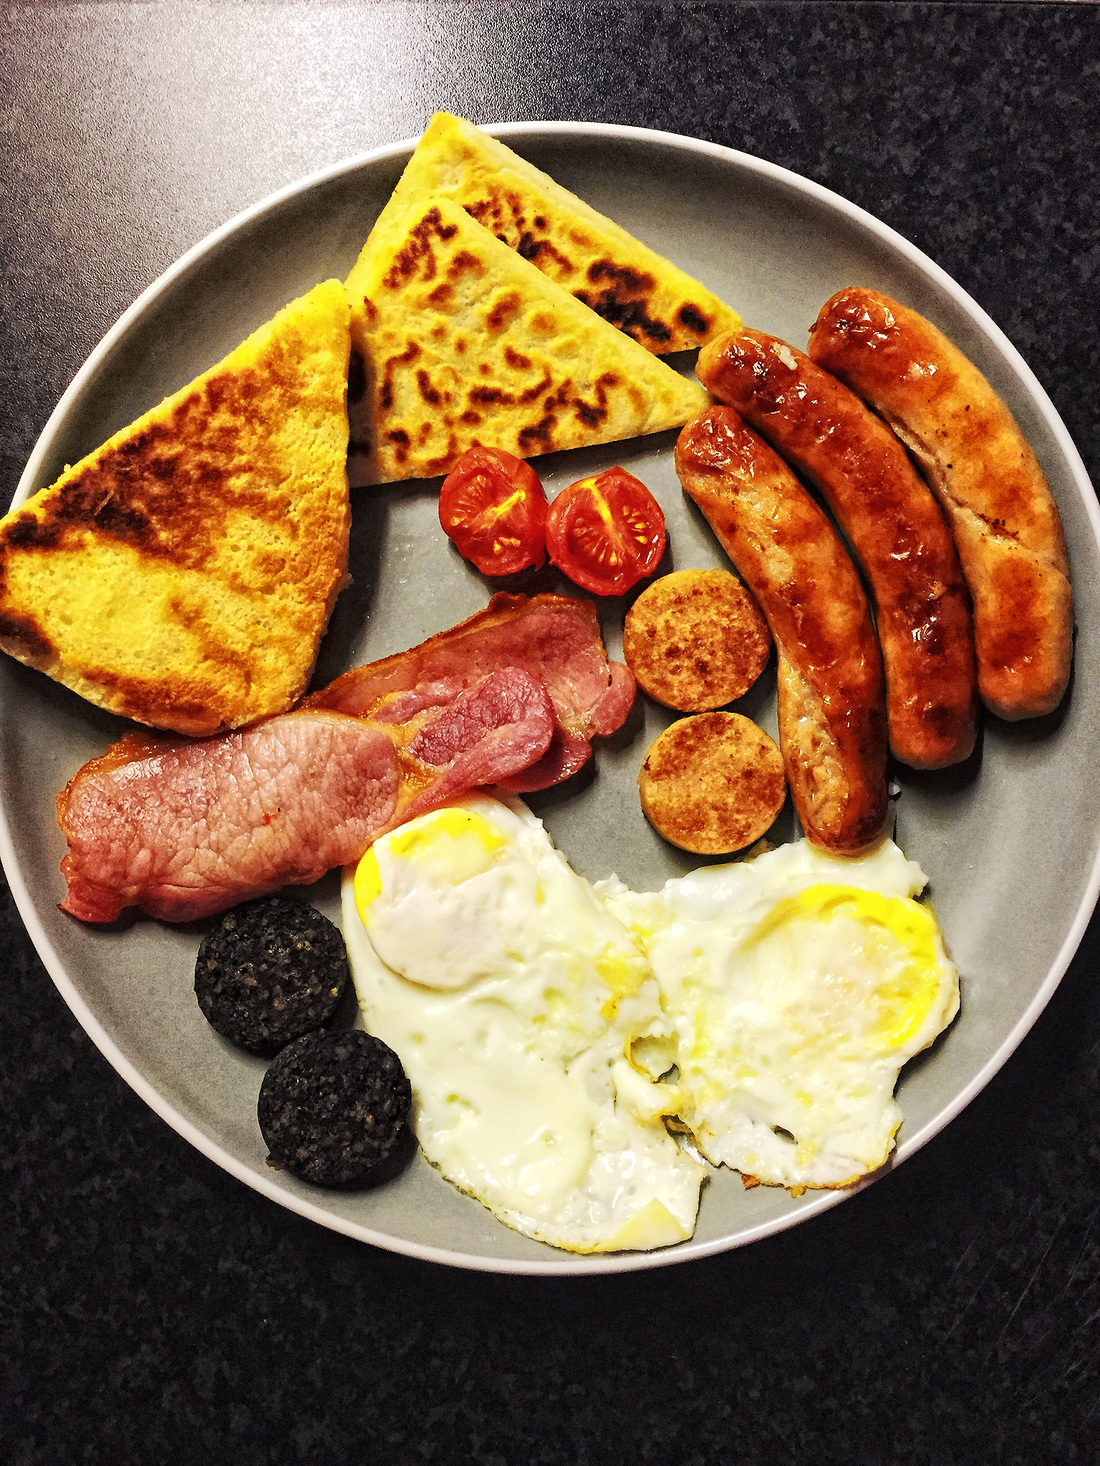 The Ultimate Guide To Finding The Best Ulster Fry - Derry Vibe